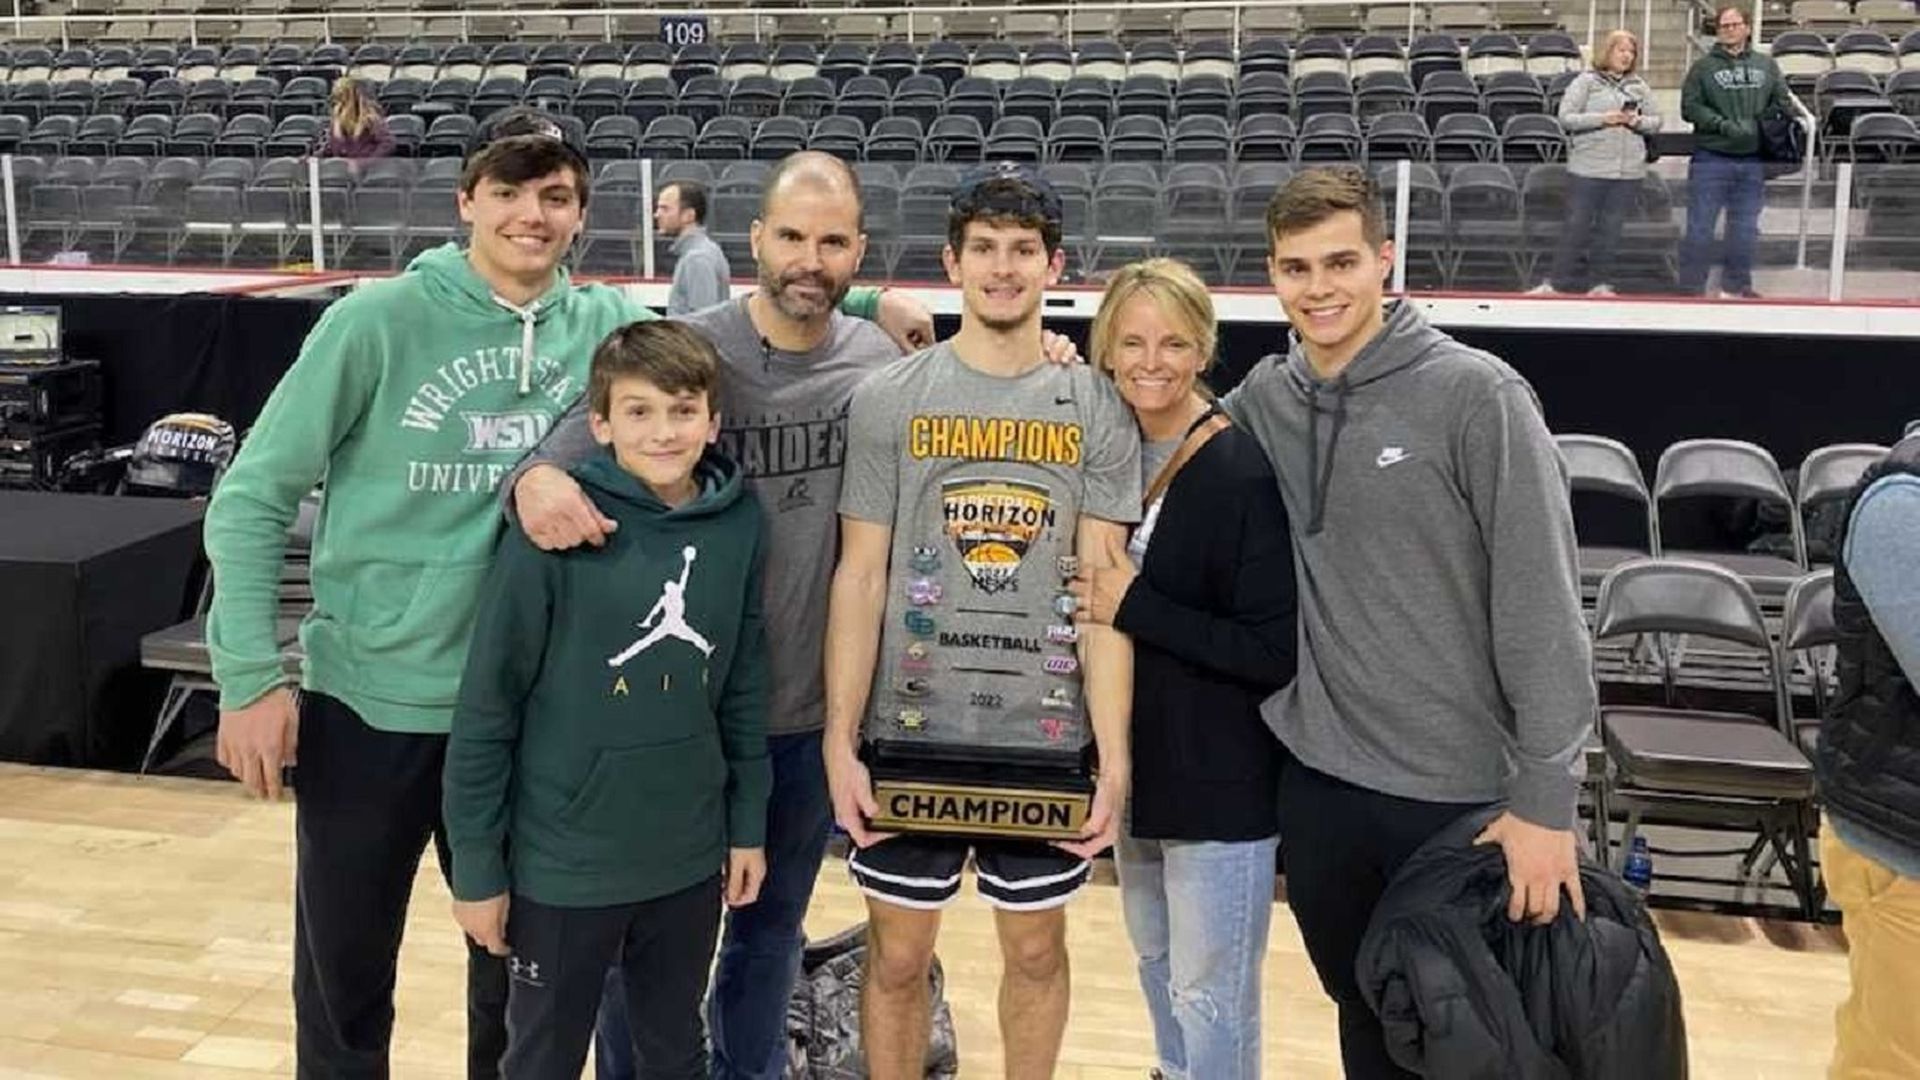 A family poses with a basketball playing son carrying a Horizon League championship trophy.